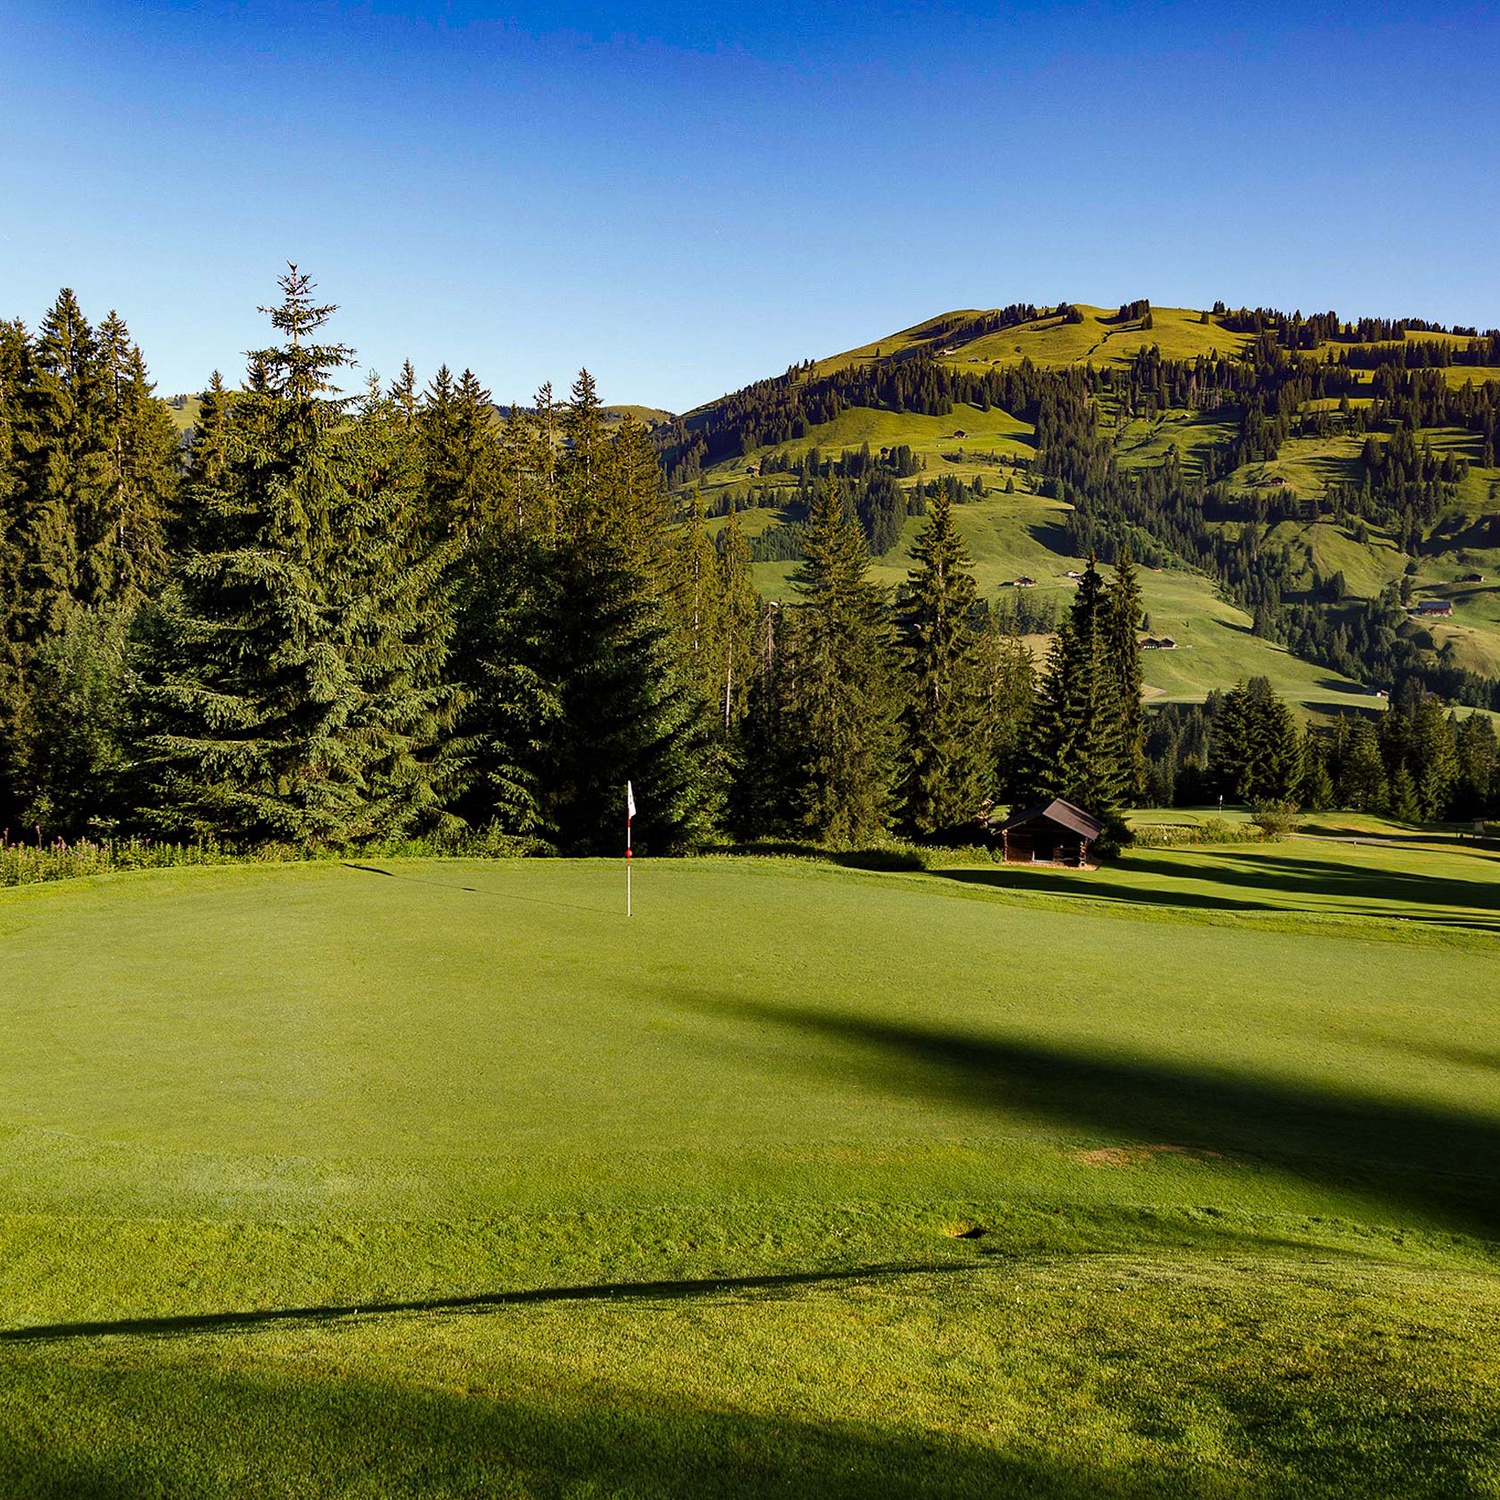 Golfing on the unique alpine golf course with 18 holes